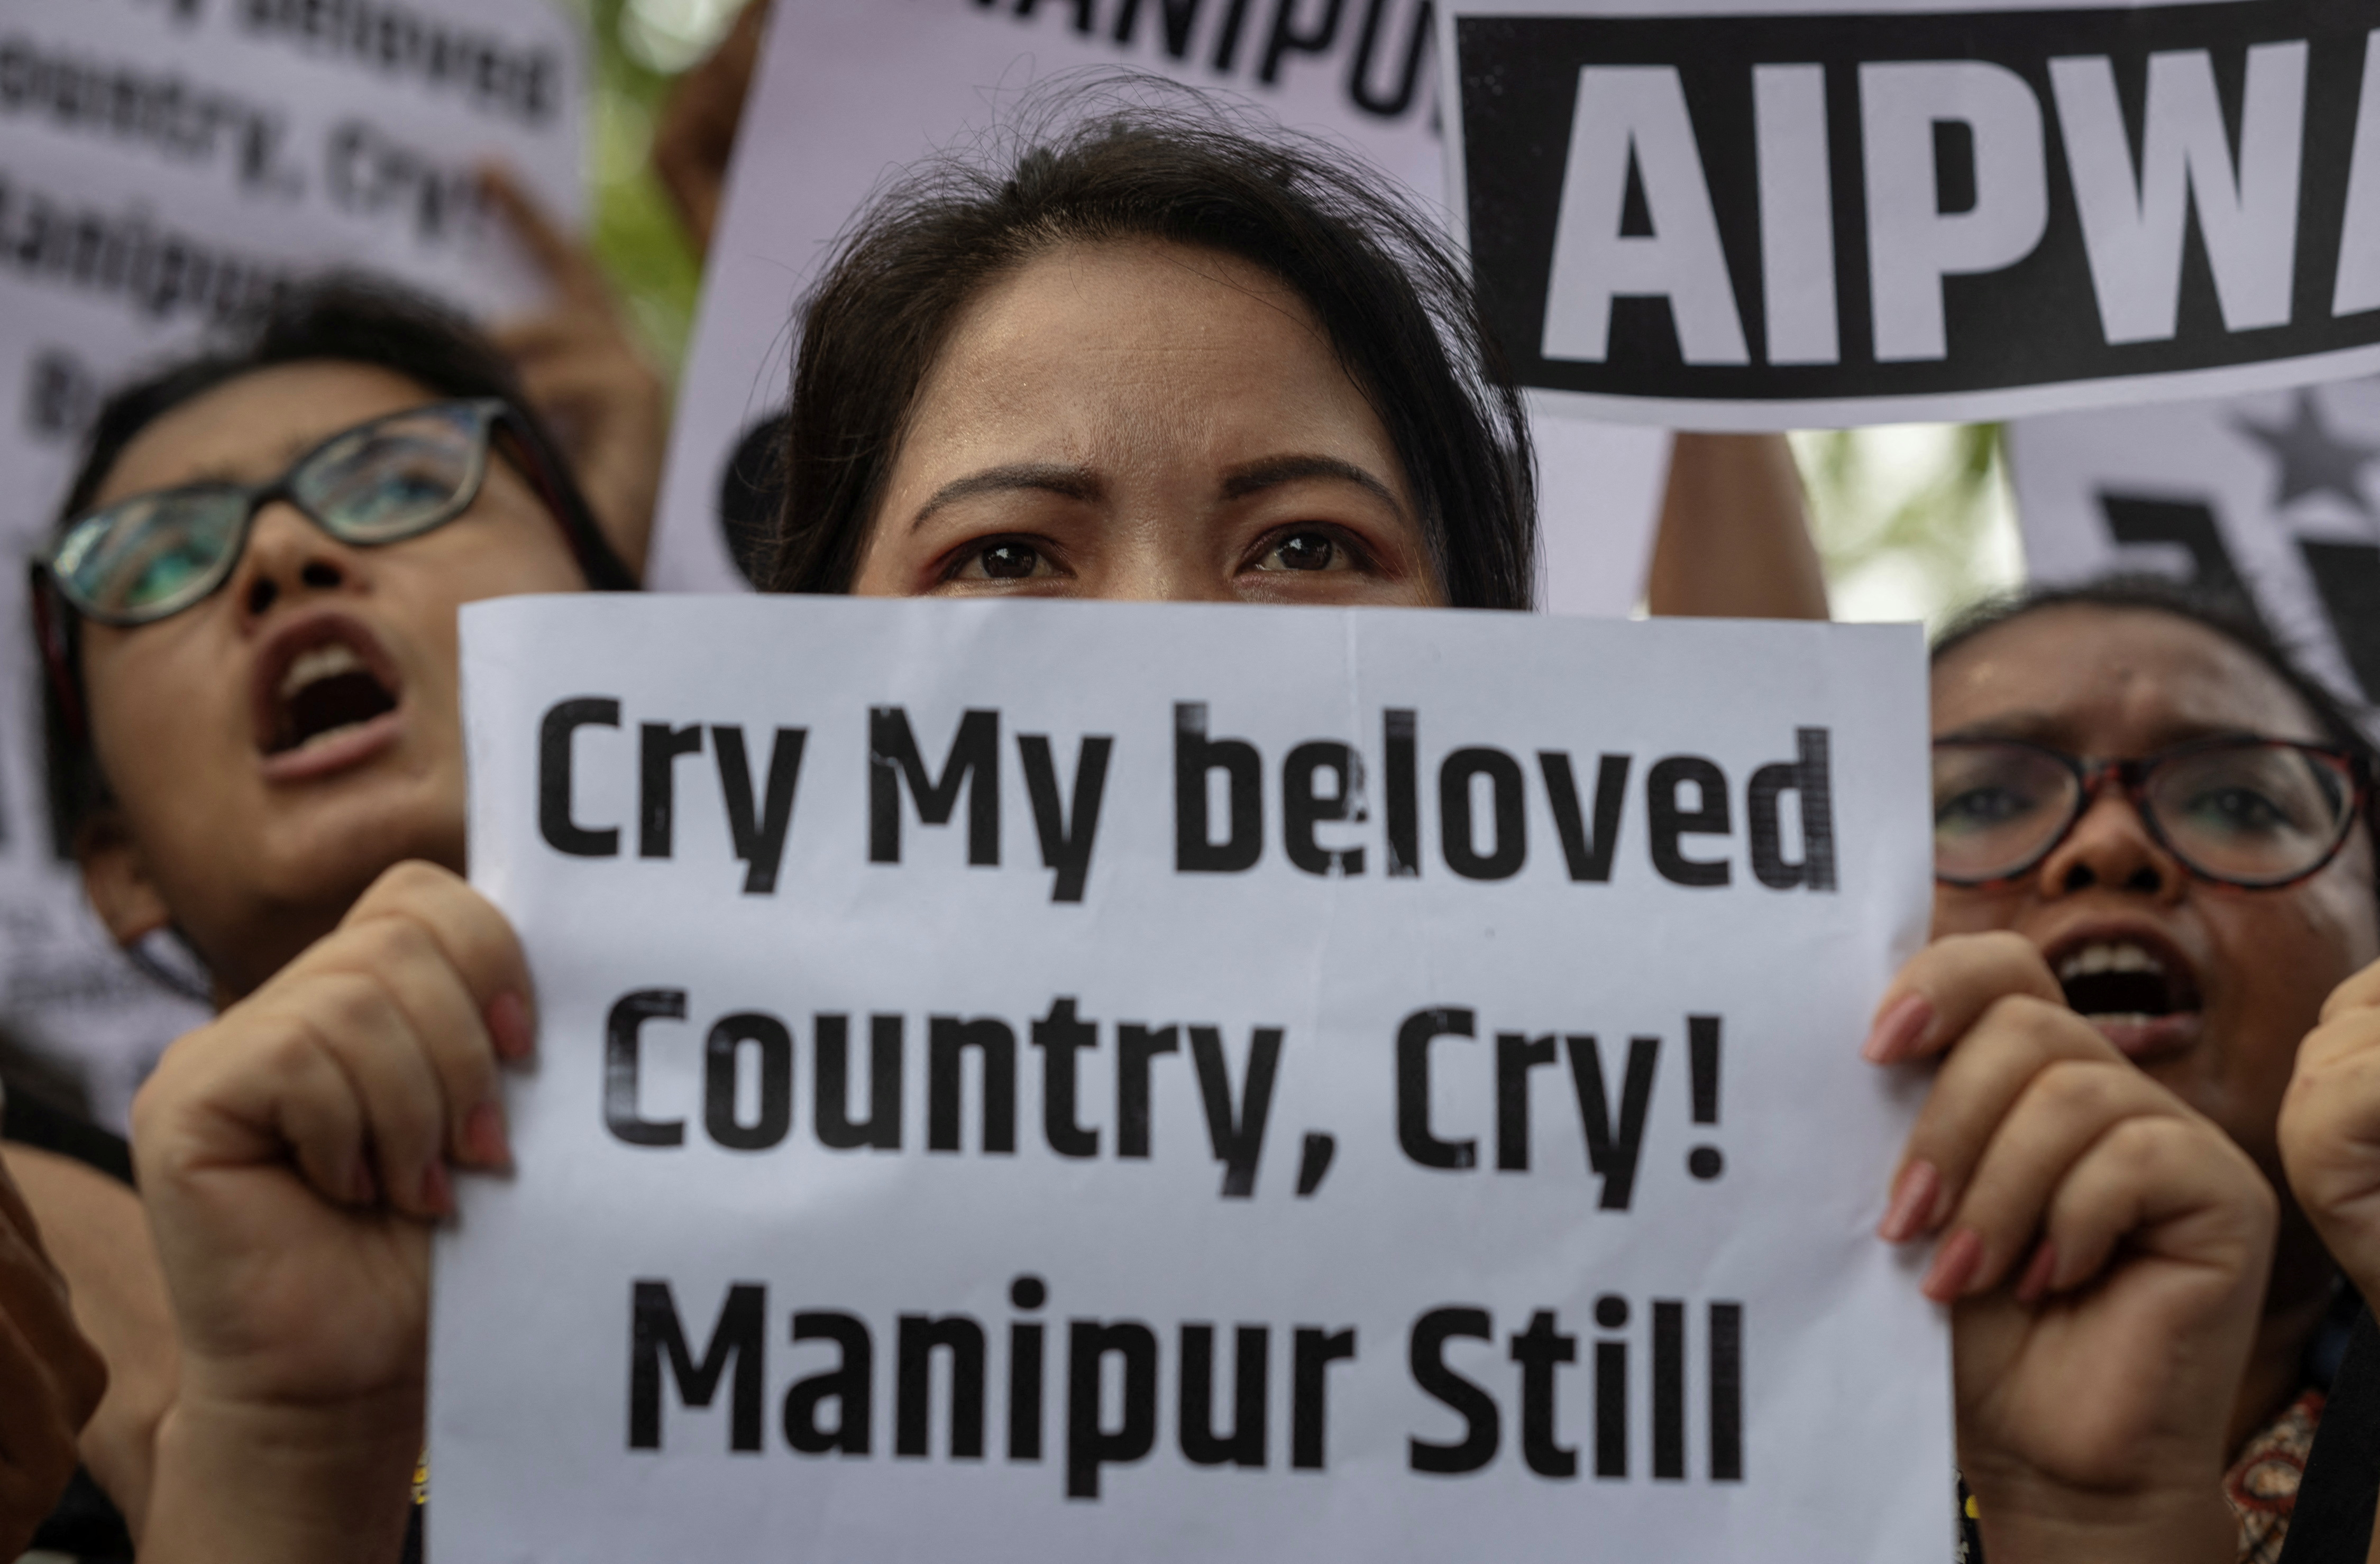 Manipur: ethnic violence in the Indian state explained | Reuters